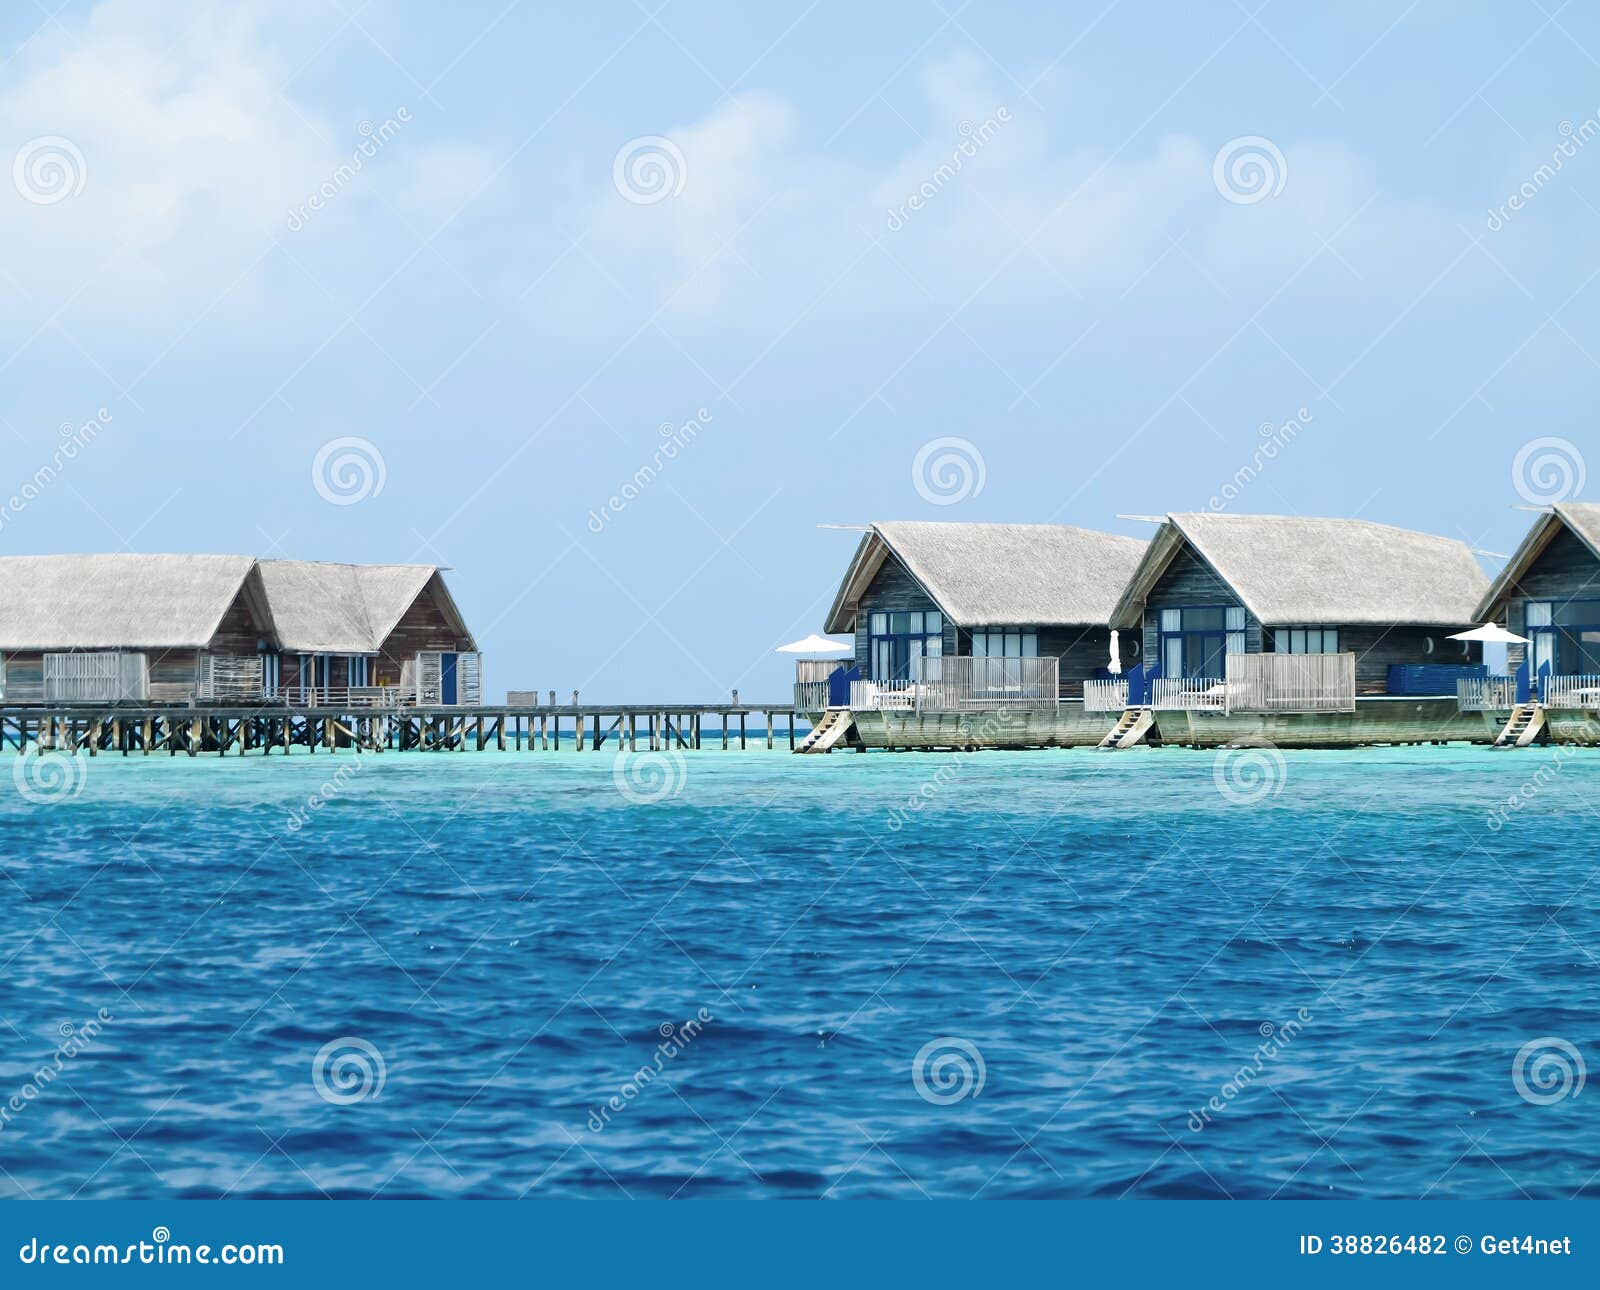 Water Villa Cottages On Island Stock Photo Image Of Blue